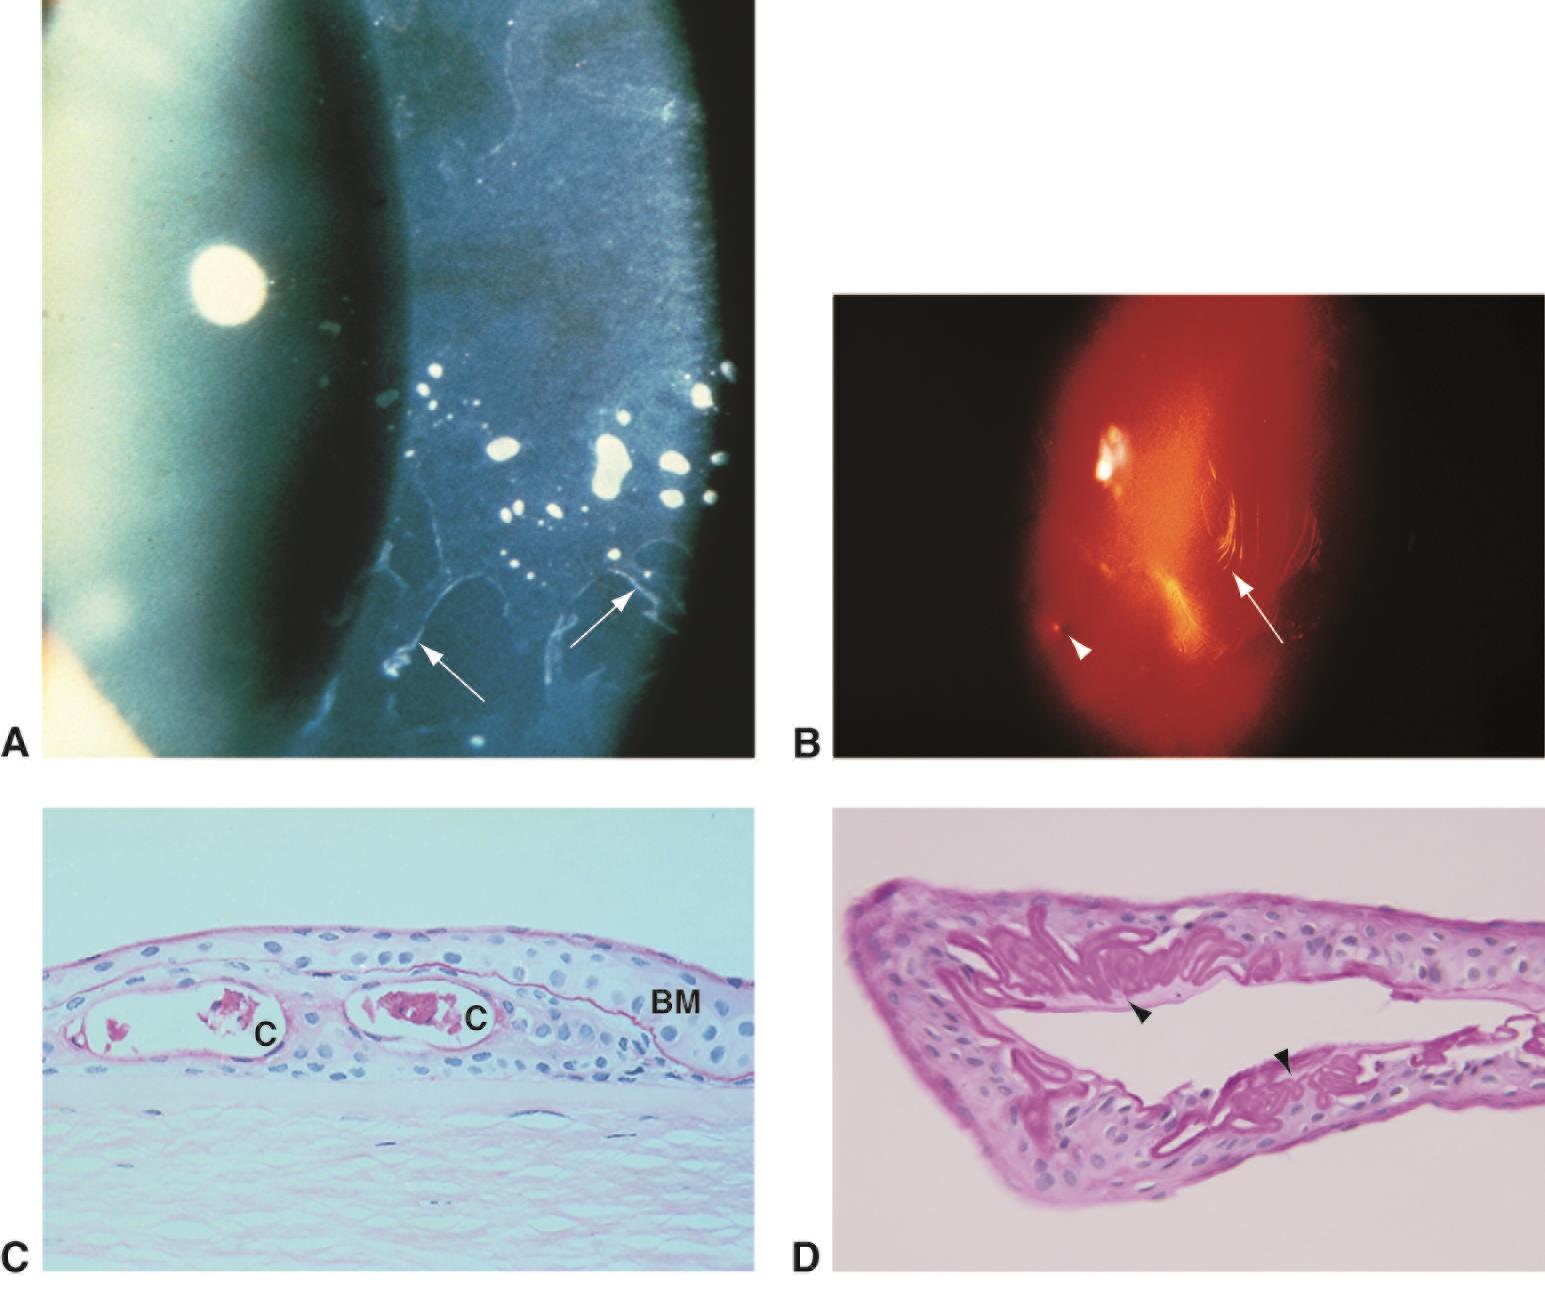 Epithelial basement membrane dystrophy - American Academy of Ophthalmology